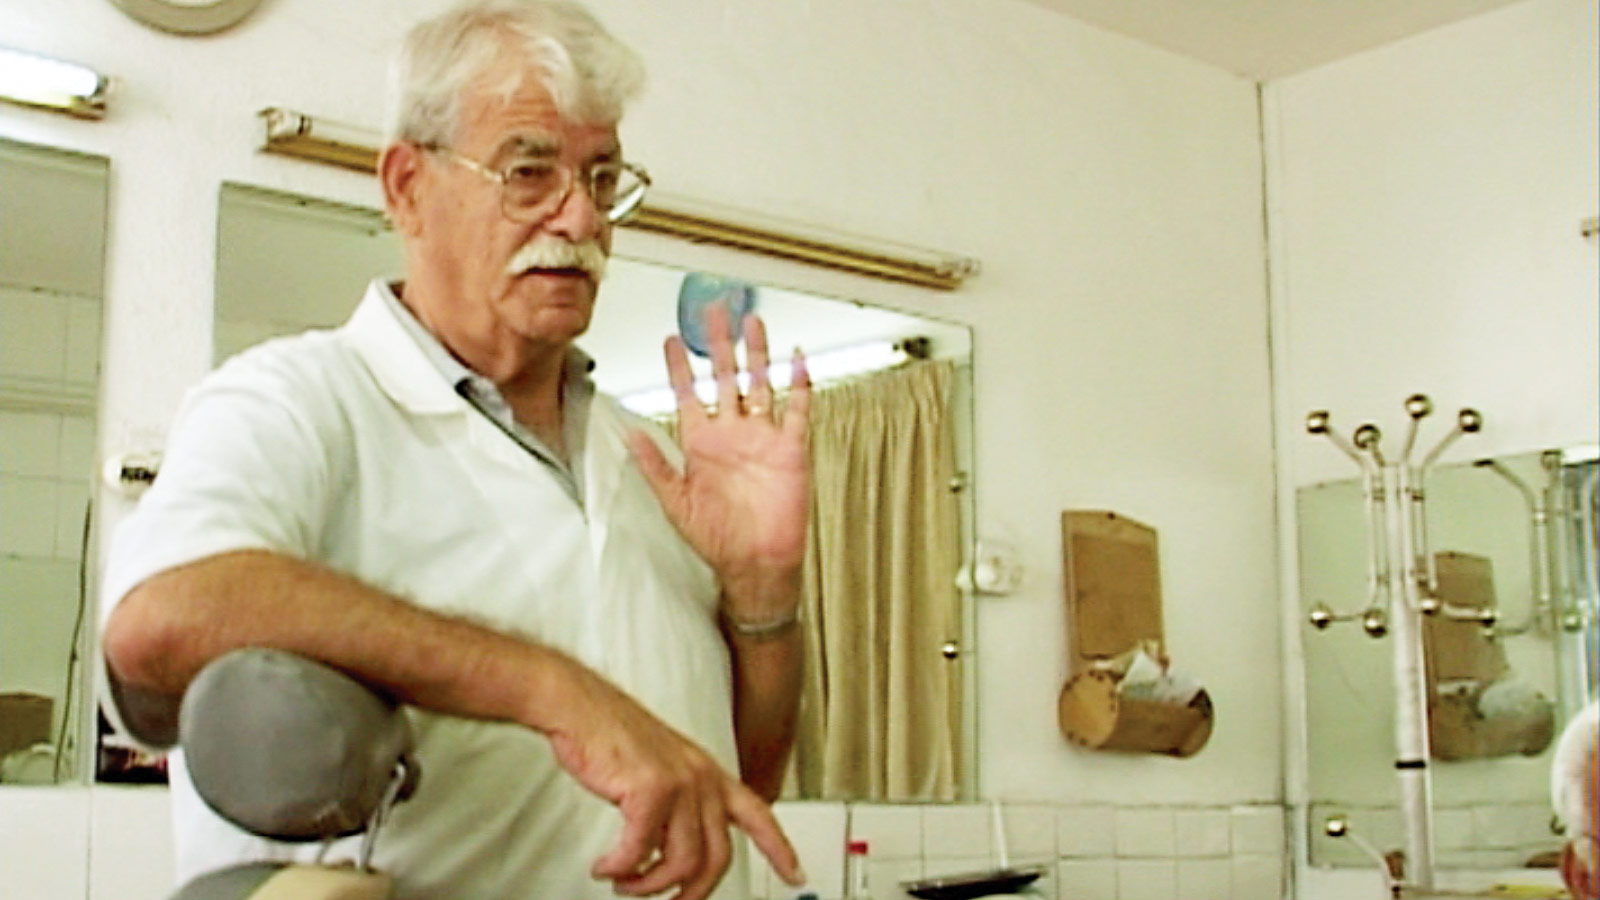 Film still from “Route 181: Extracts from a Palestinian-Israeli Journey,” by Eyal Sivan and Michel Khleifi, two thousand three.